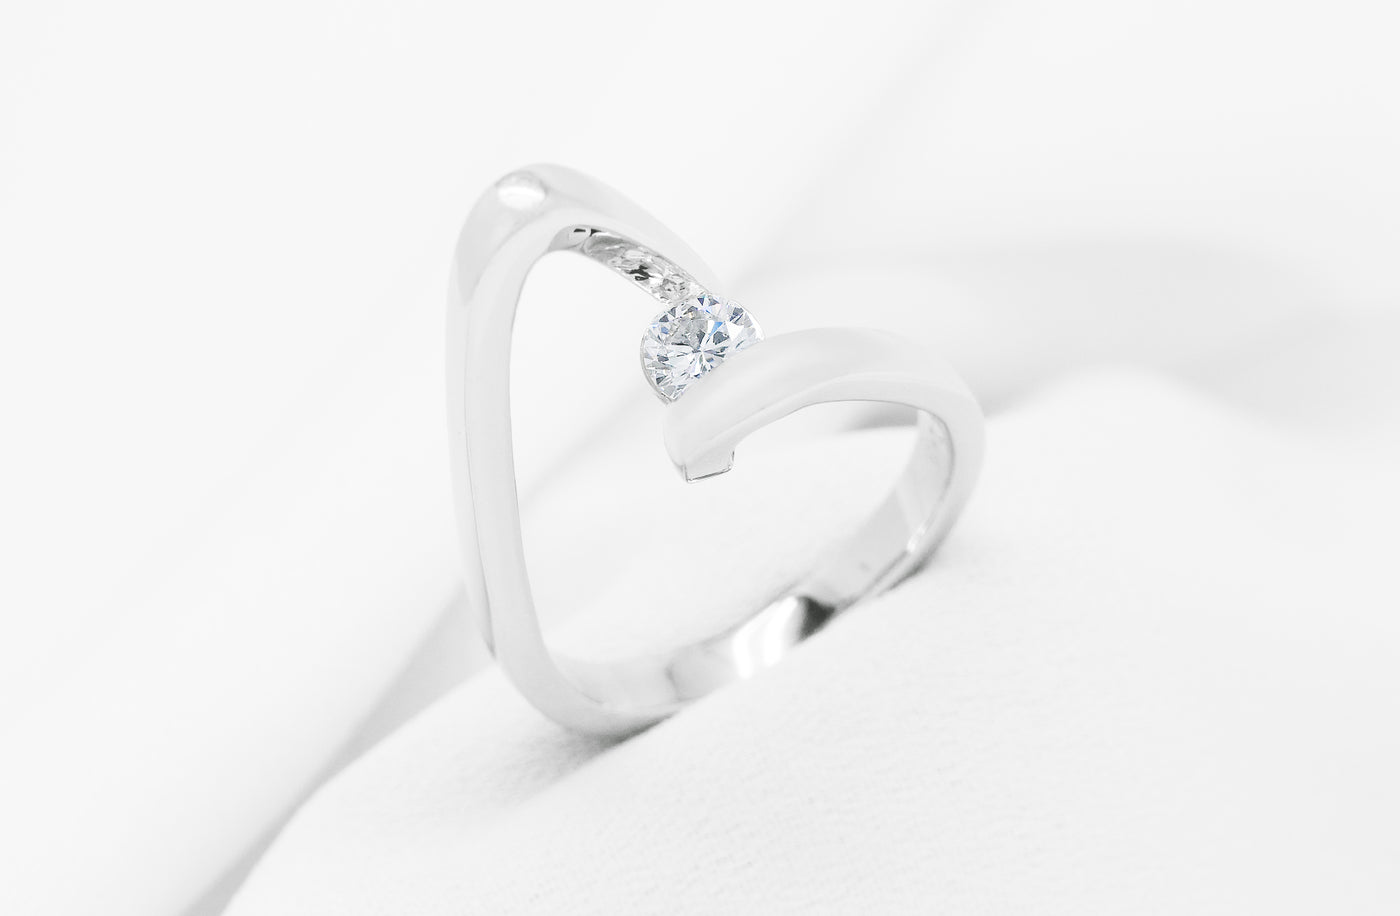 Inspired Collection, Diamond Ring, Jewellery, Jewelry, ring design, contemporary, modern, specialist, Platinum, 18k, 18ct, white gold, round brilliant cut, spiral, brilliant cut, tension setting, ribbon, ribbond, spike, peak, ready to go, ready to ship, 0.30ct, G colour, color, VS2 clarity 